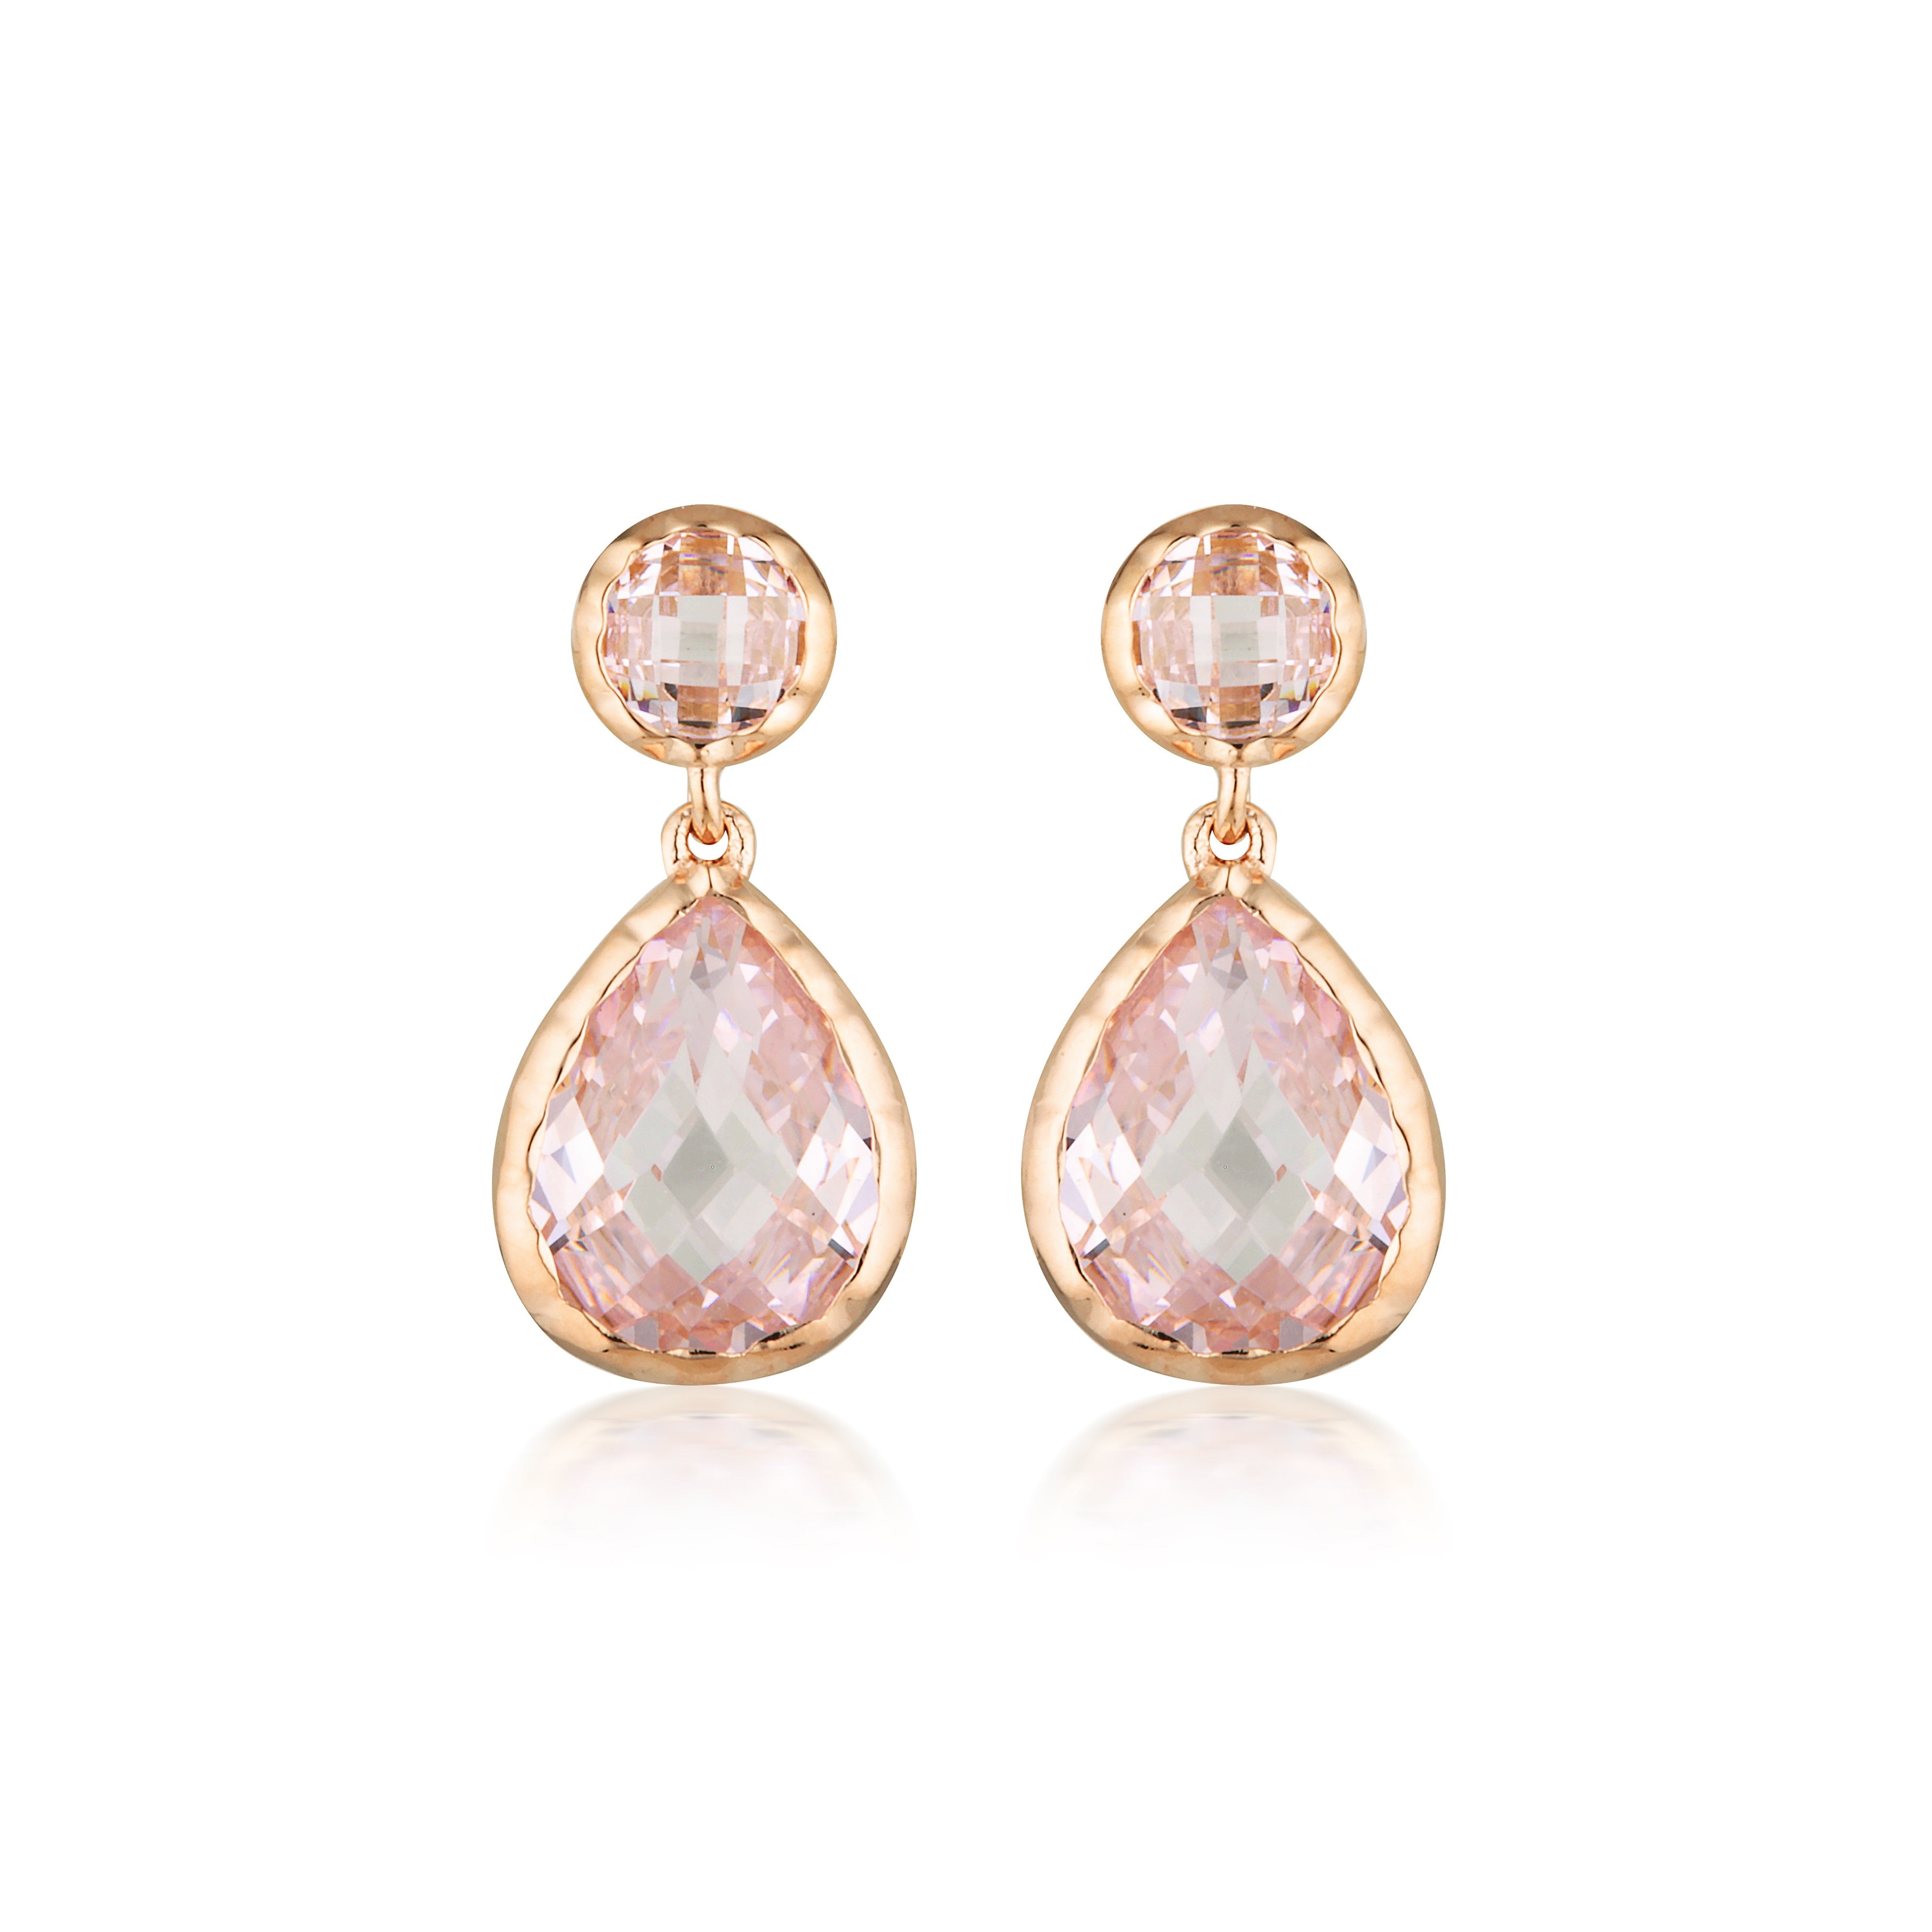 LUXE NOBILE EARRINGS PINK / ROSE GOLD